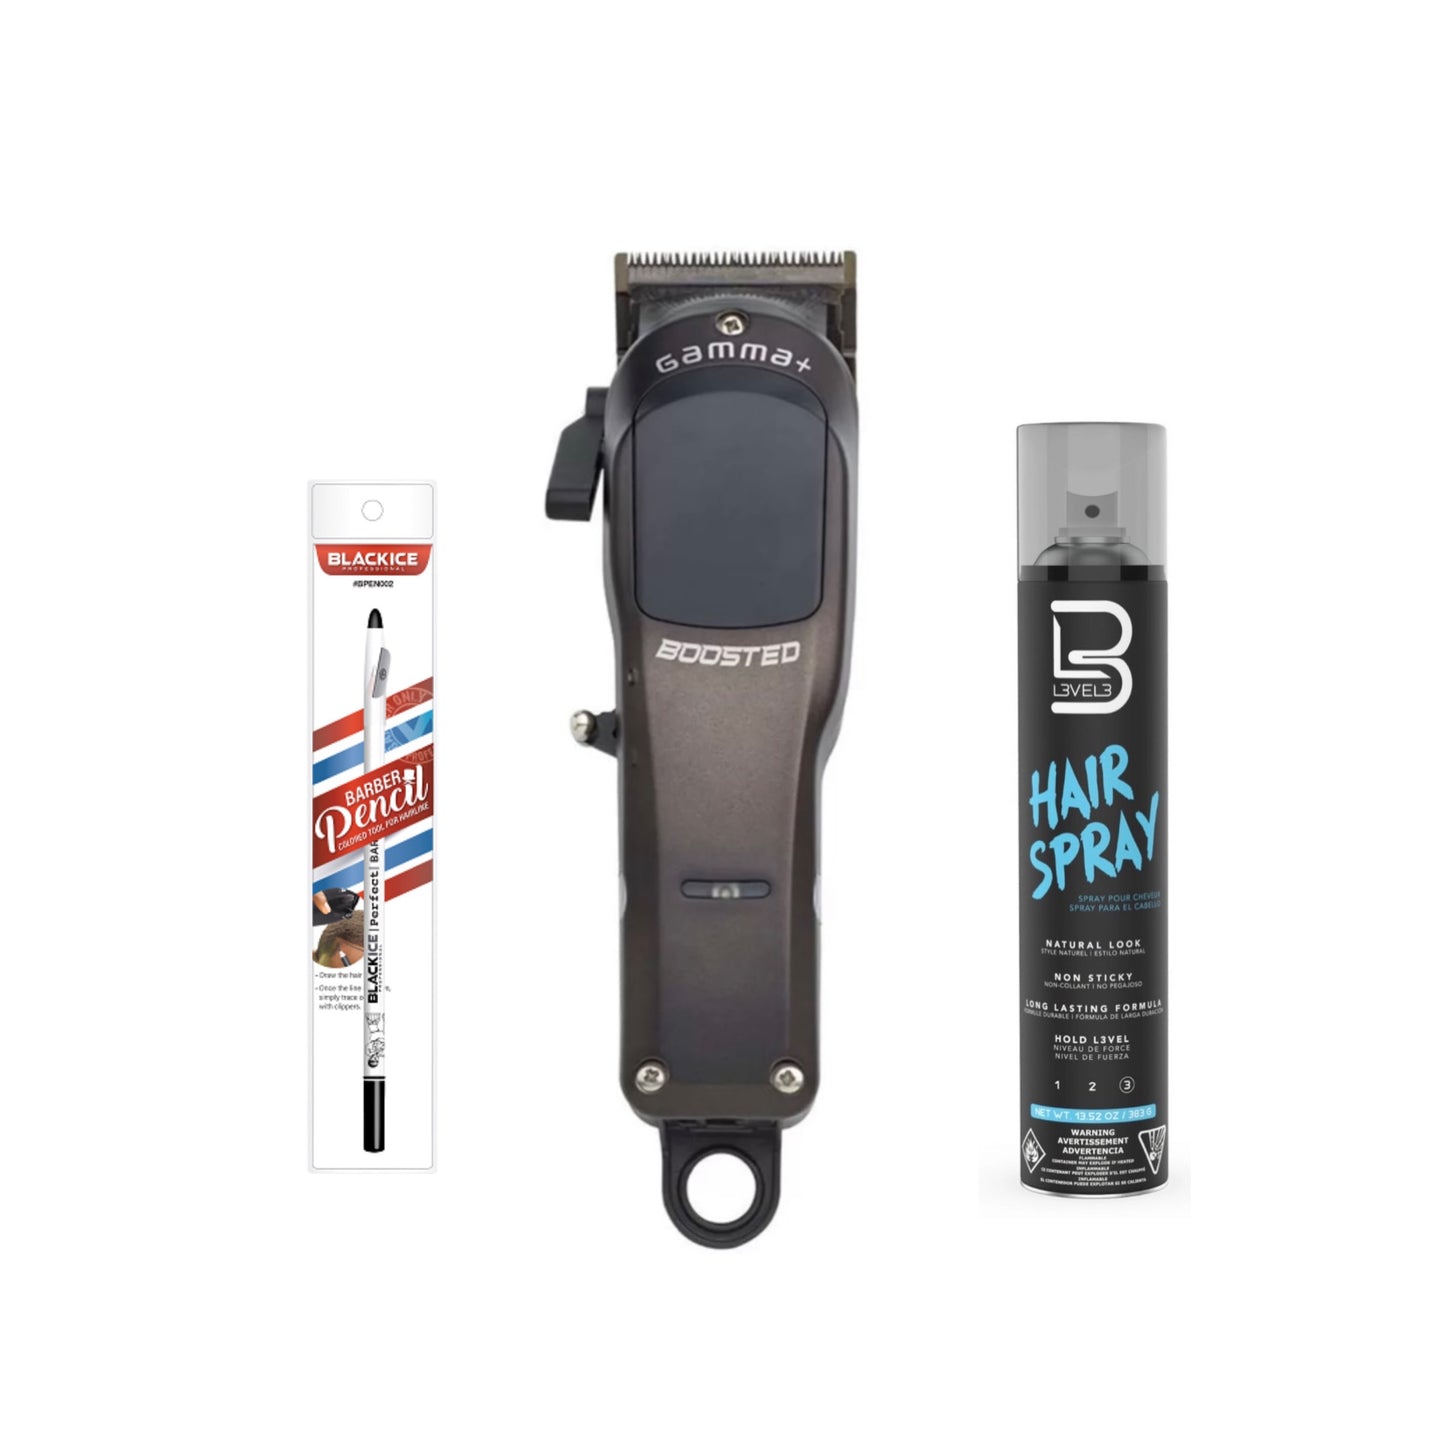 Gamma+ BOOSTED Clipper (Deal of the Month)